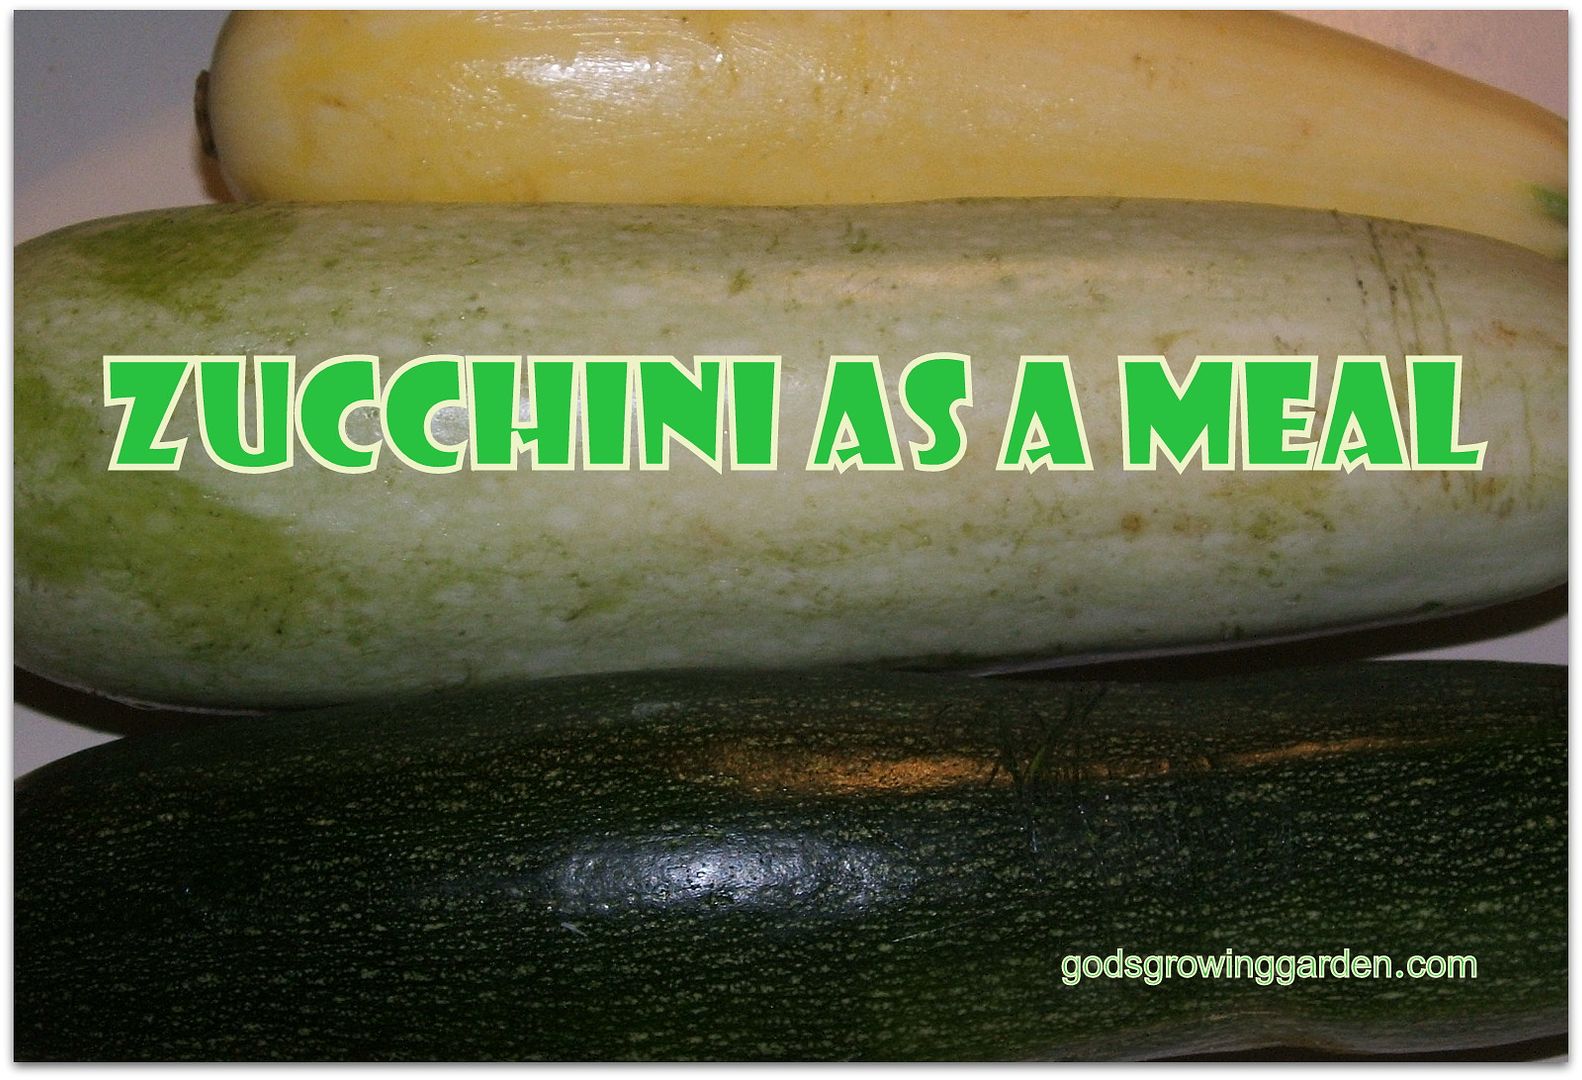 Zucchini by Angie Ouellete-Tower for godsgrowinggarden.com photo 002_zps3dbe5b4c.jpg